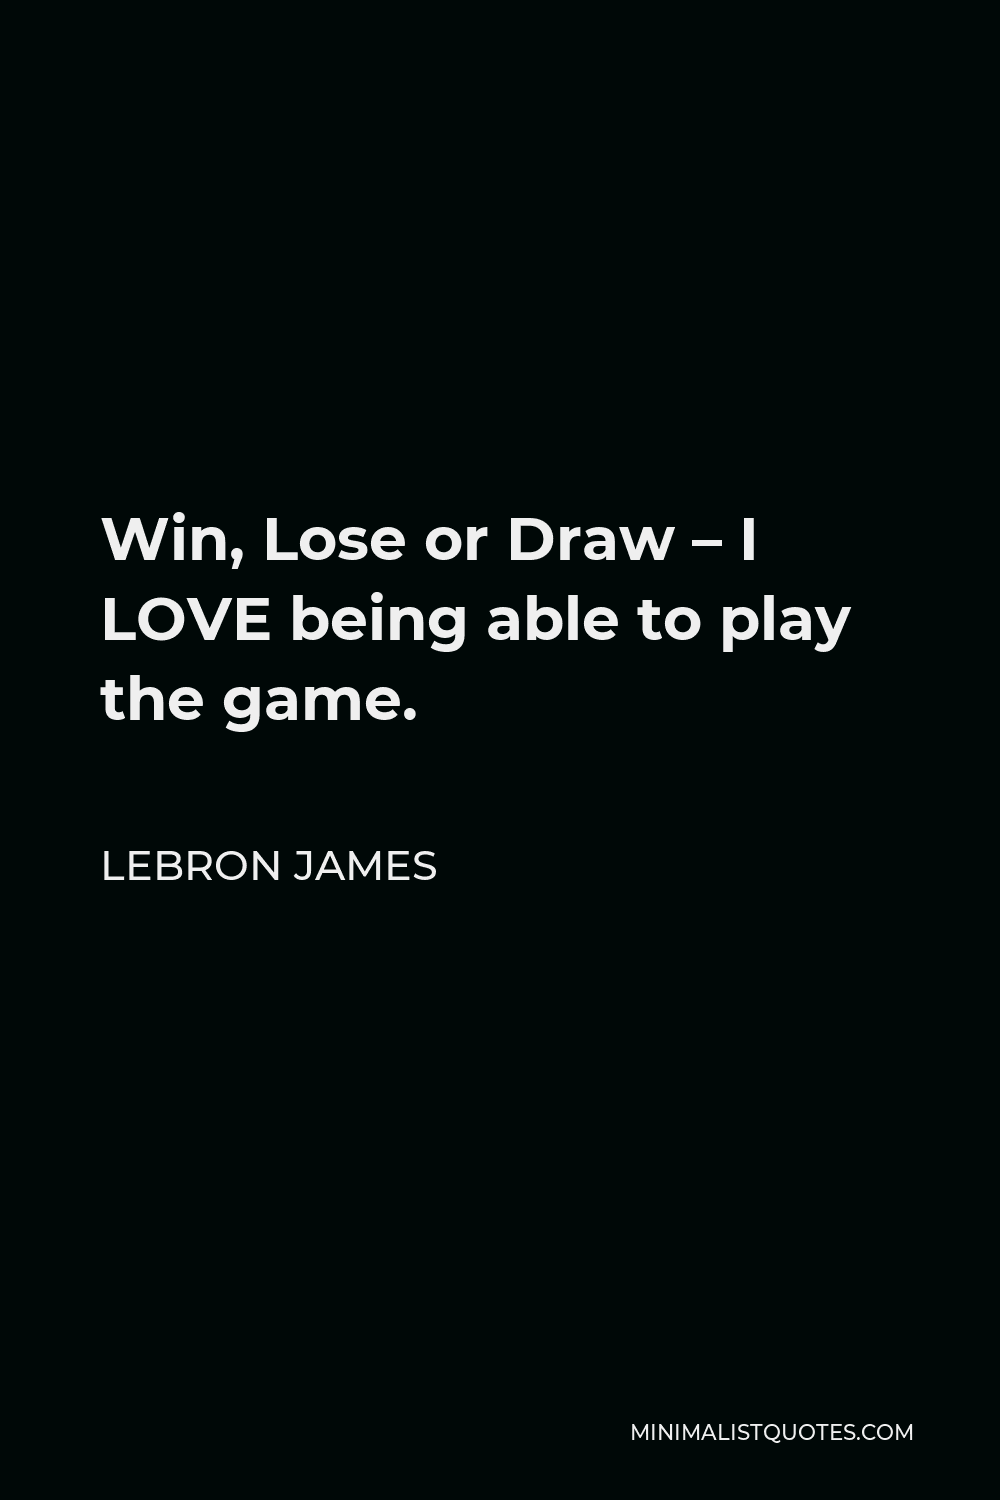 What Are Some Phrases for Win, Lose or Draw?